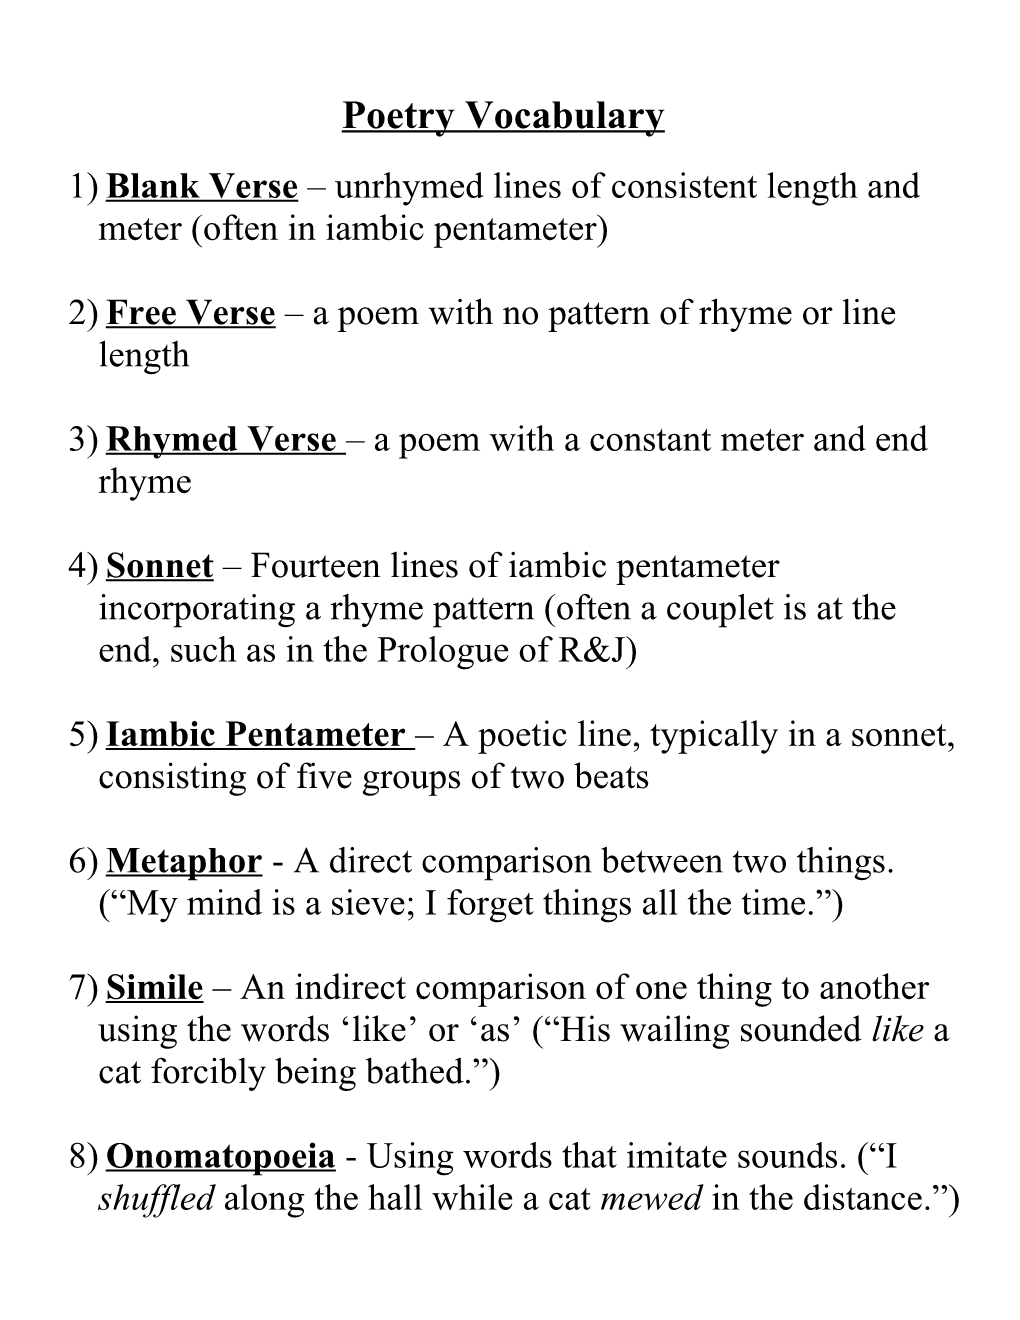 Blank Verse Unrhymed Lines of Consistent Length and Meter, Often in Iambic Pentameter